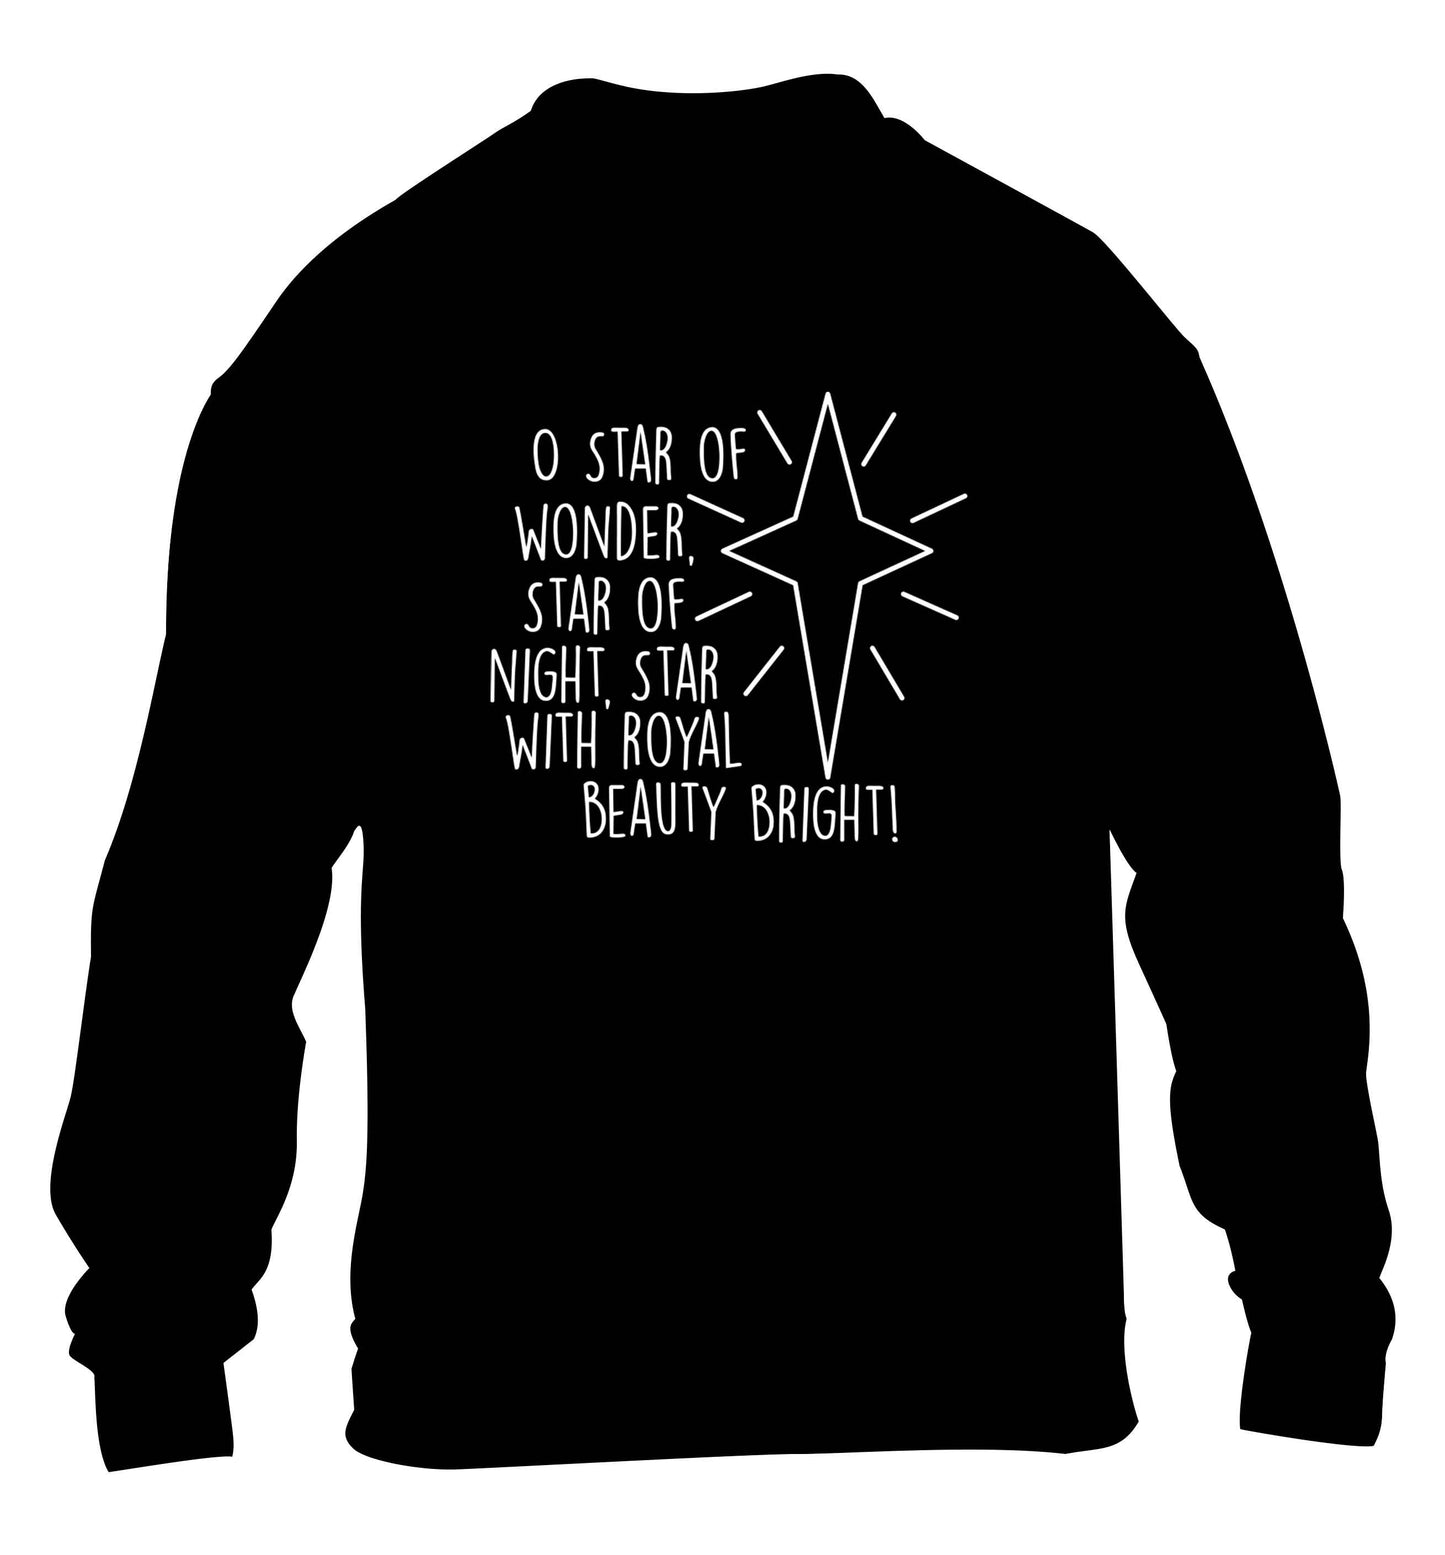 Oh star of wonder star of night, star with royal beauty bright children's black sweater 12-13 Years